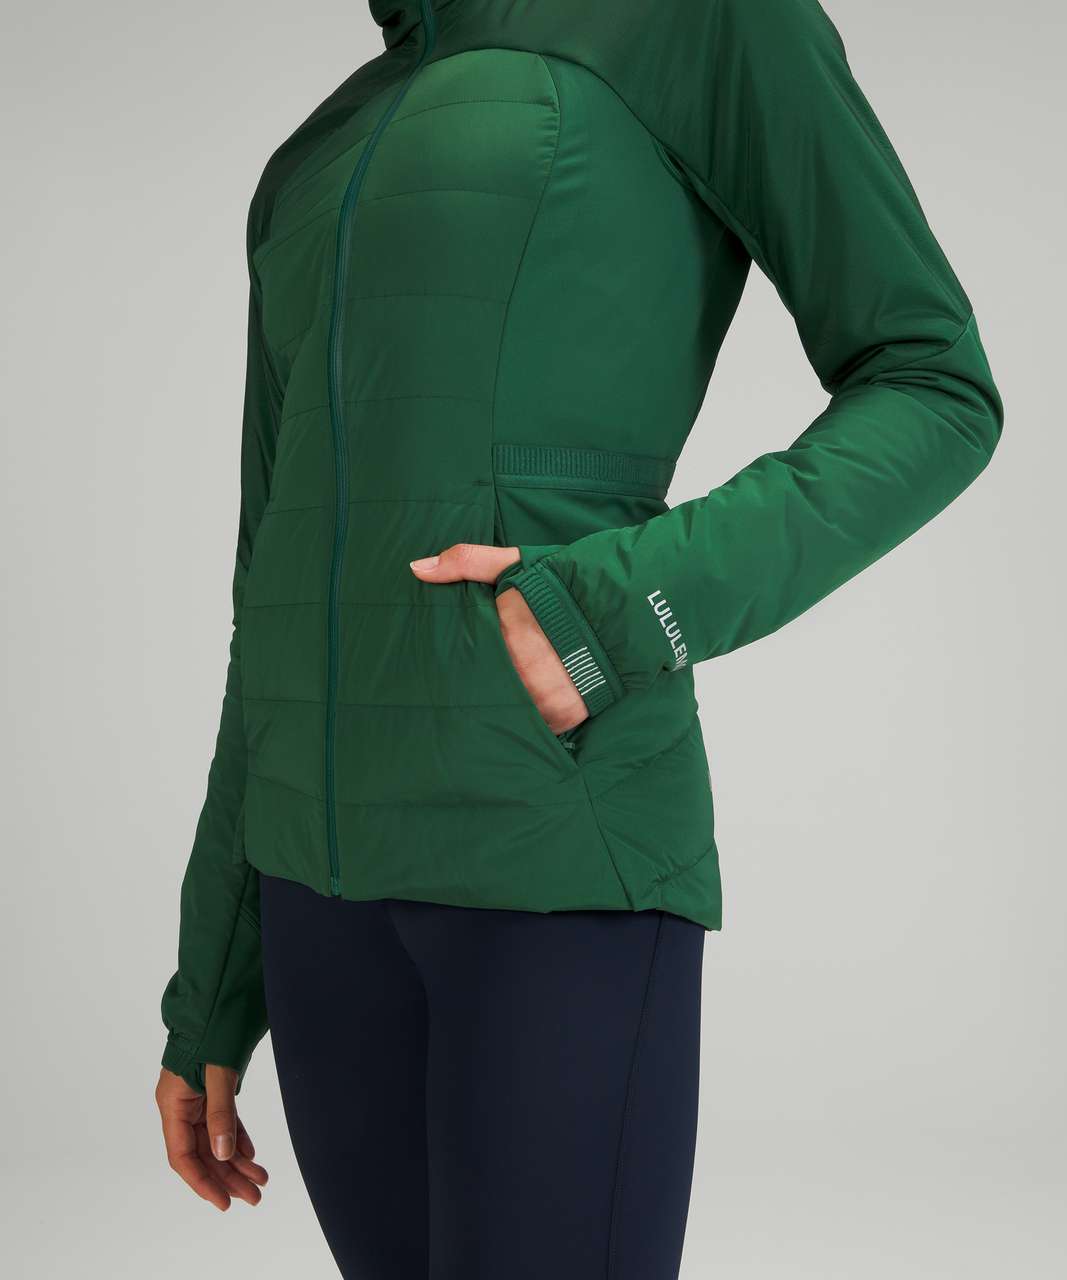 Lululemon Down for It All Jacket - Everglade Green (First Release